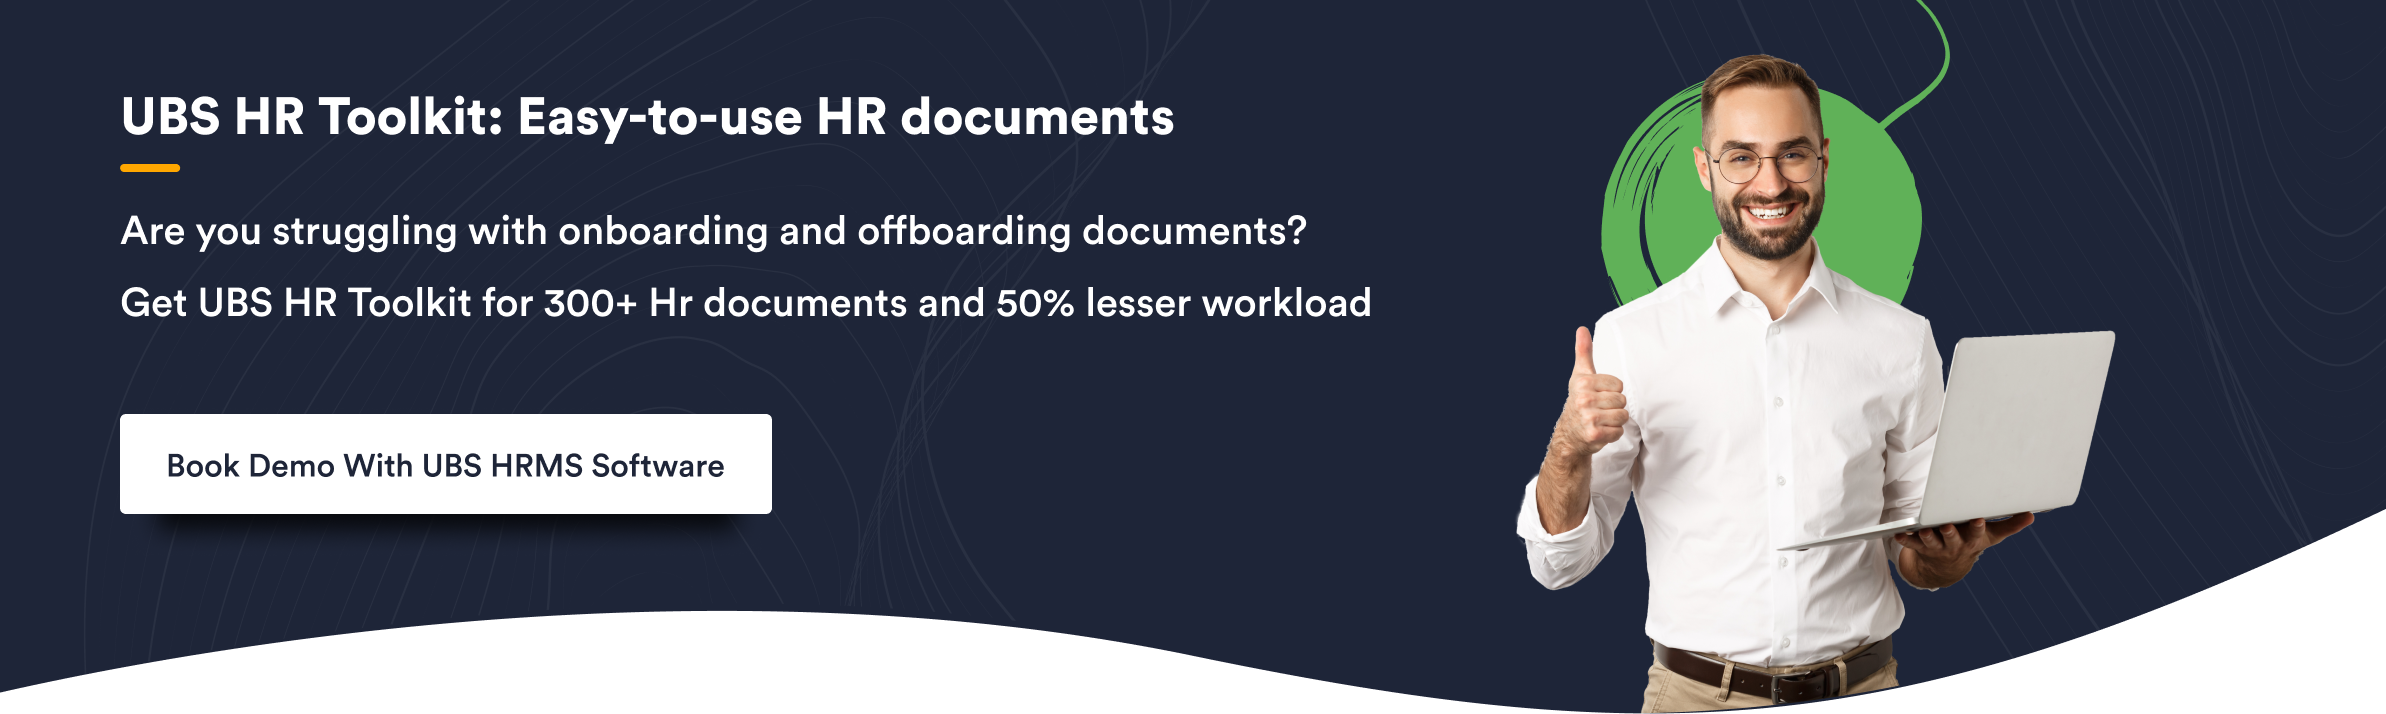 UBS HR Toolkit Easy to use HR documents